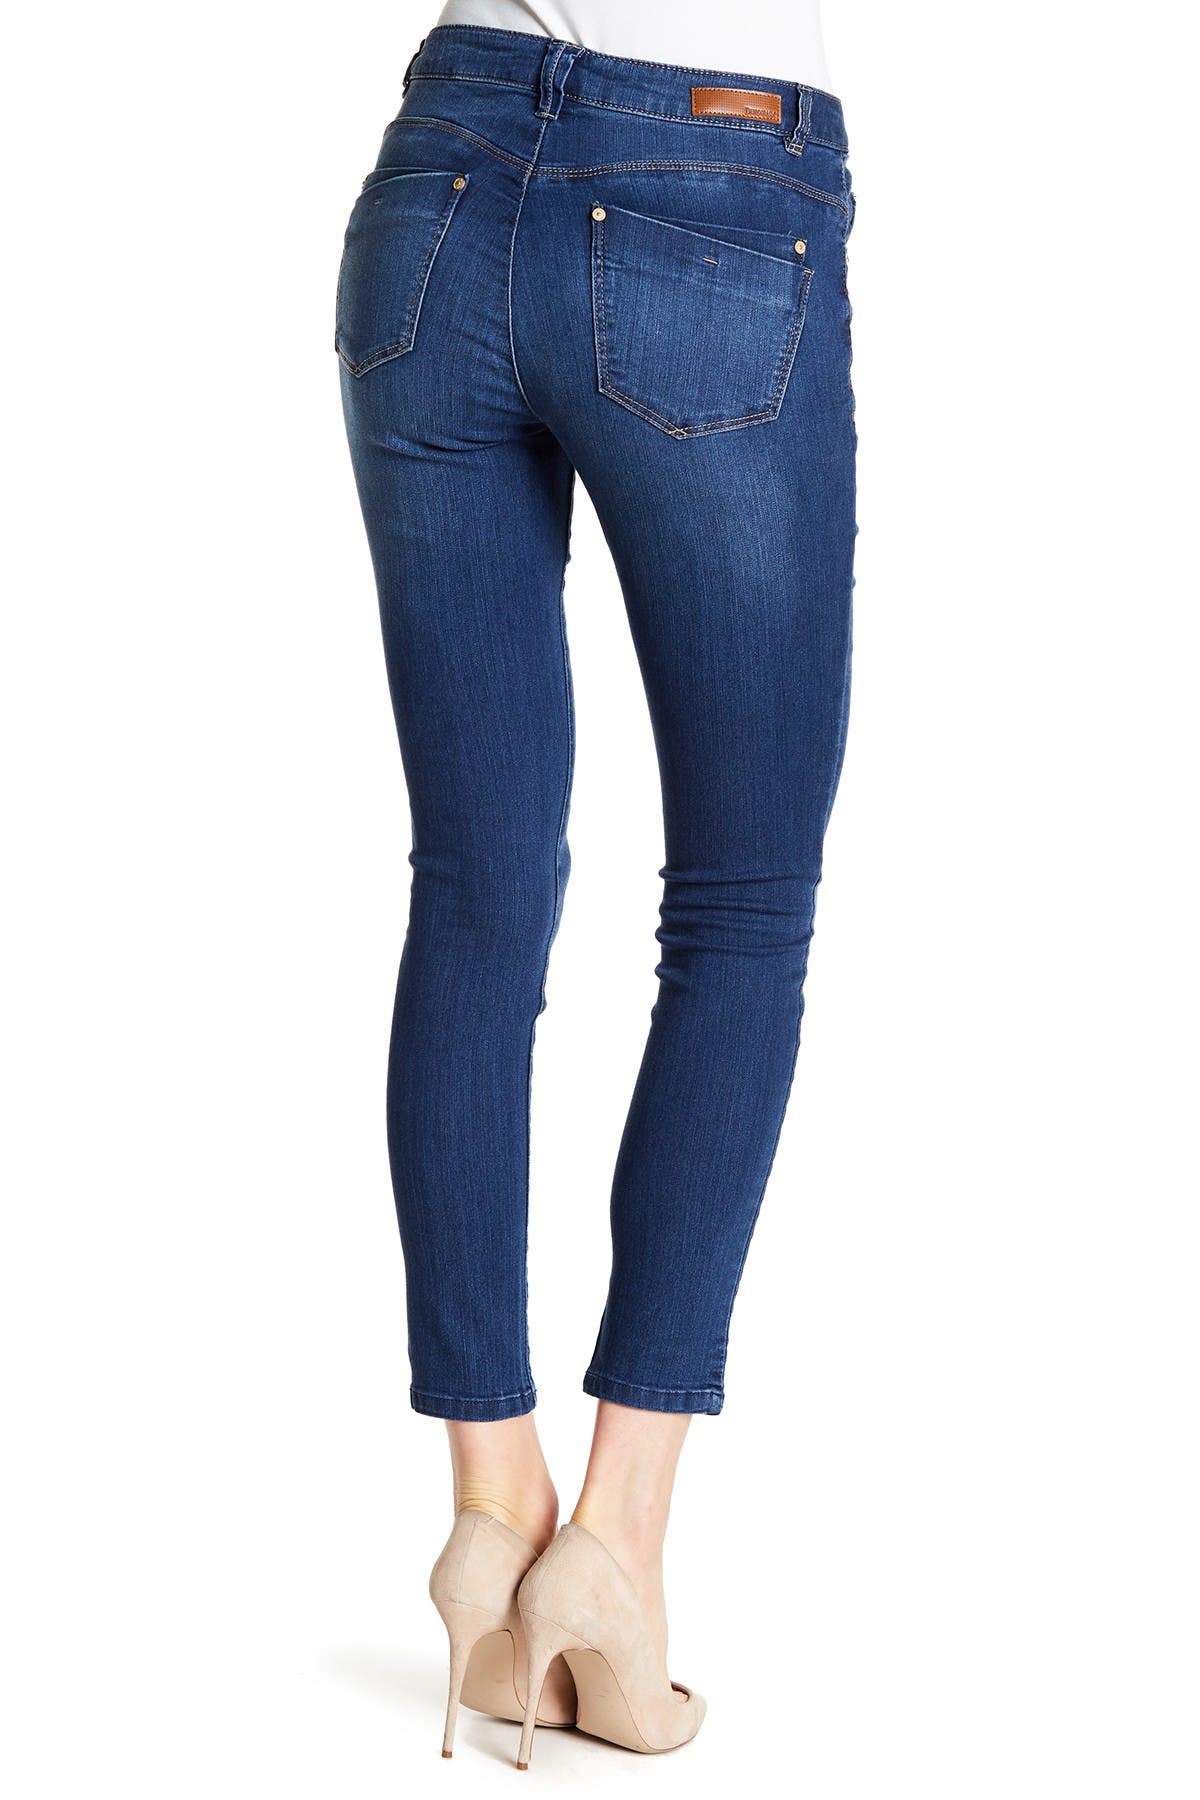 democracy freedom ankle skimmer jeans